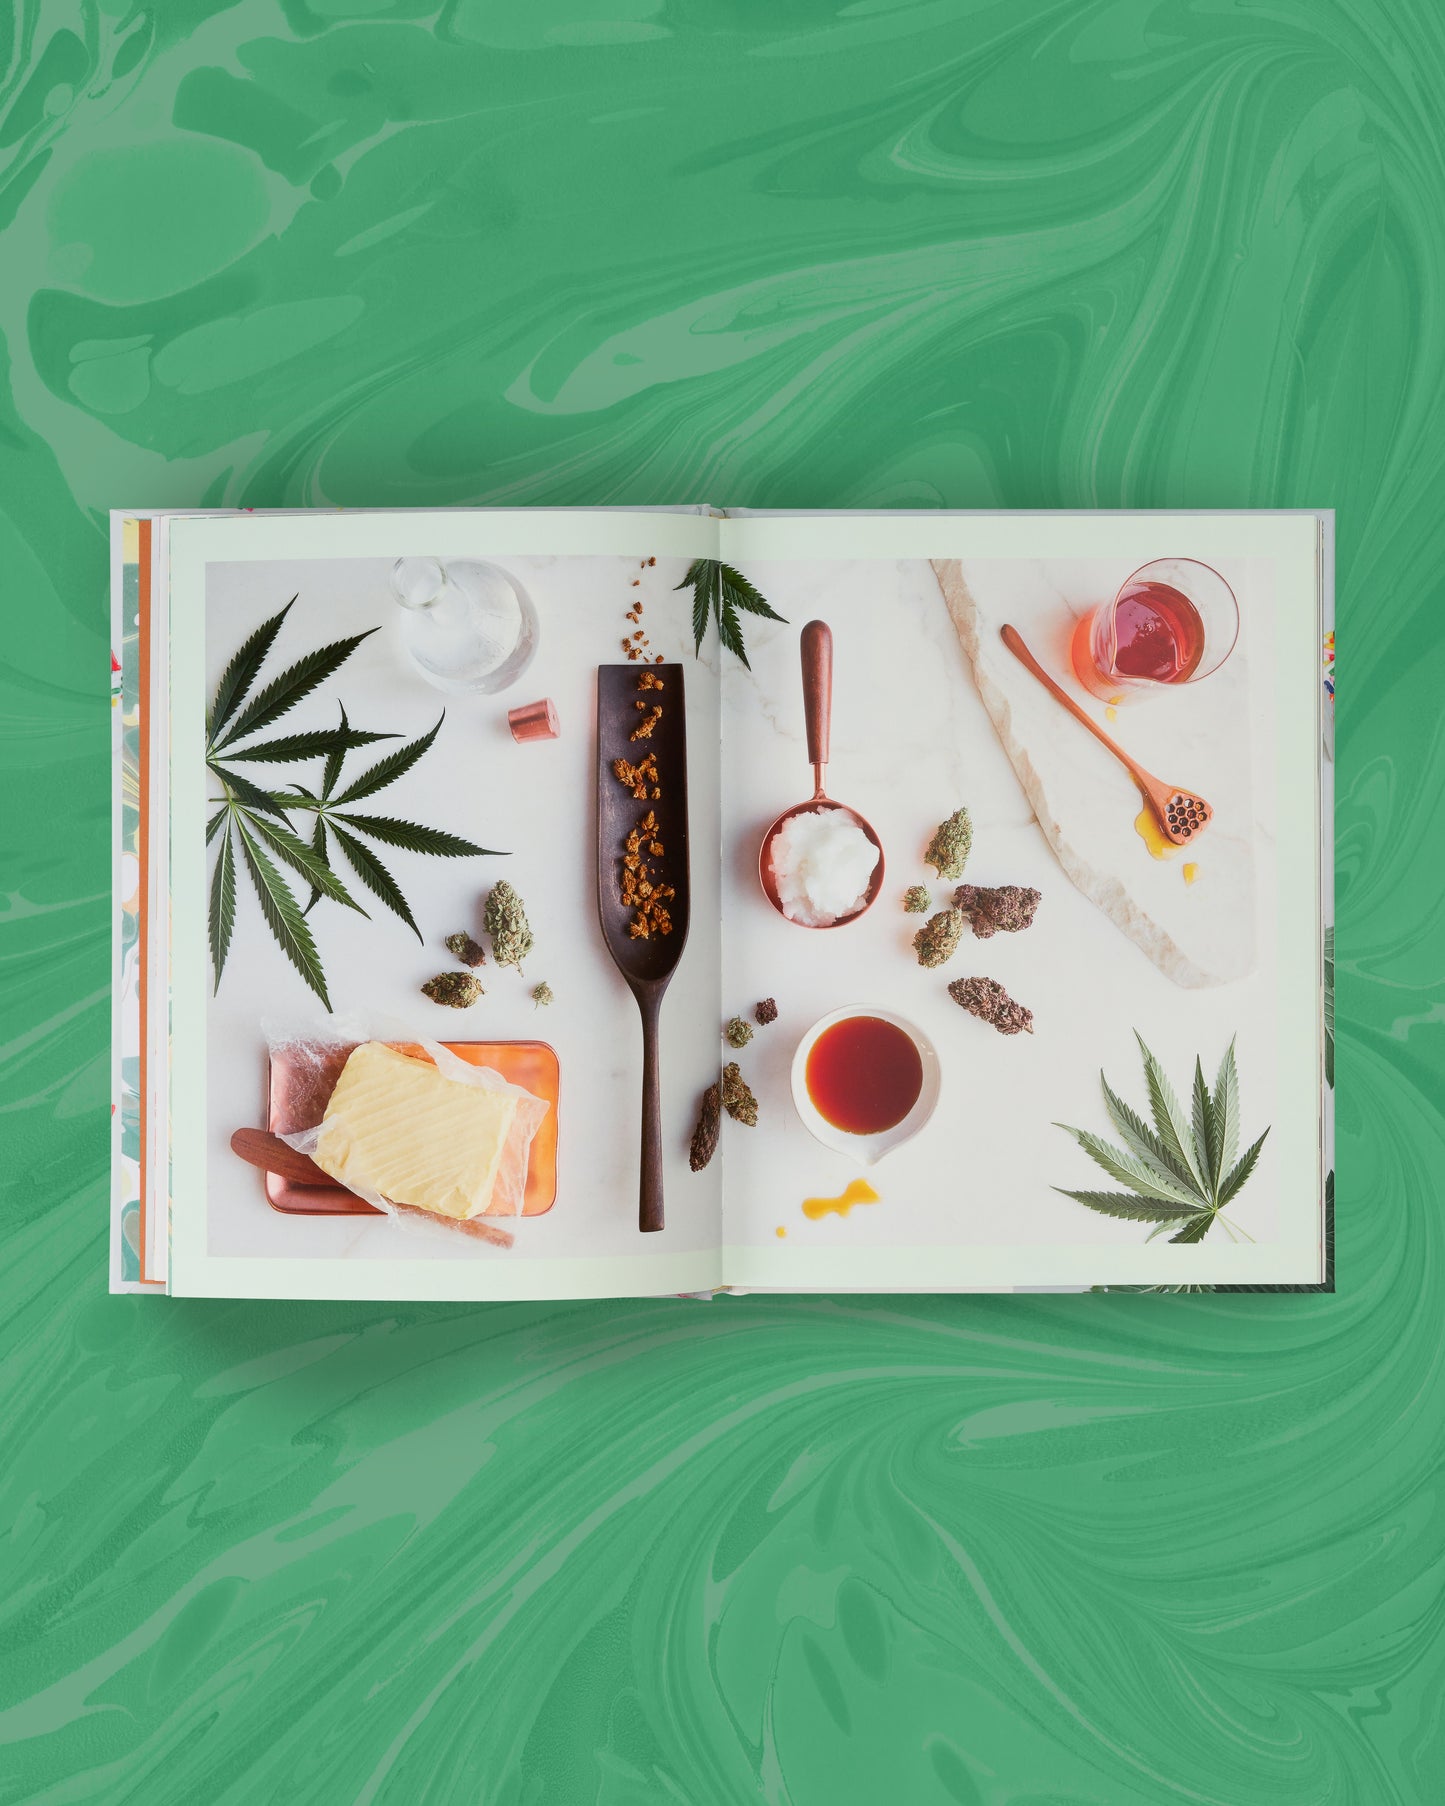 EDIBLES Small Bites for the Modern Cannabis Kitchen